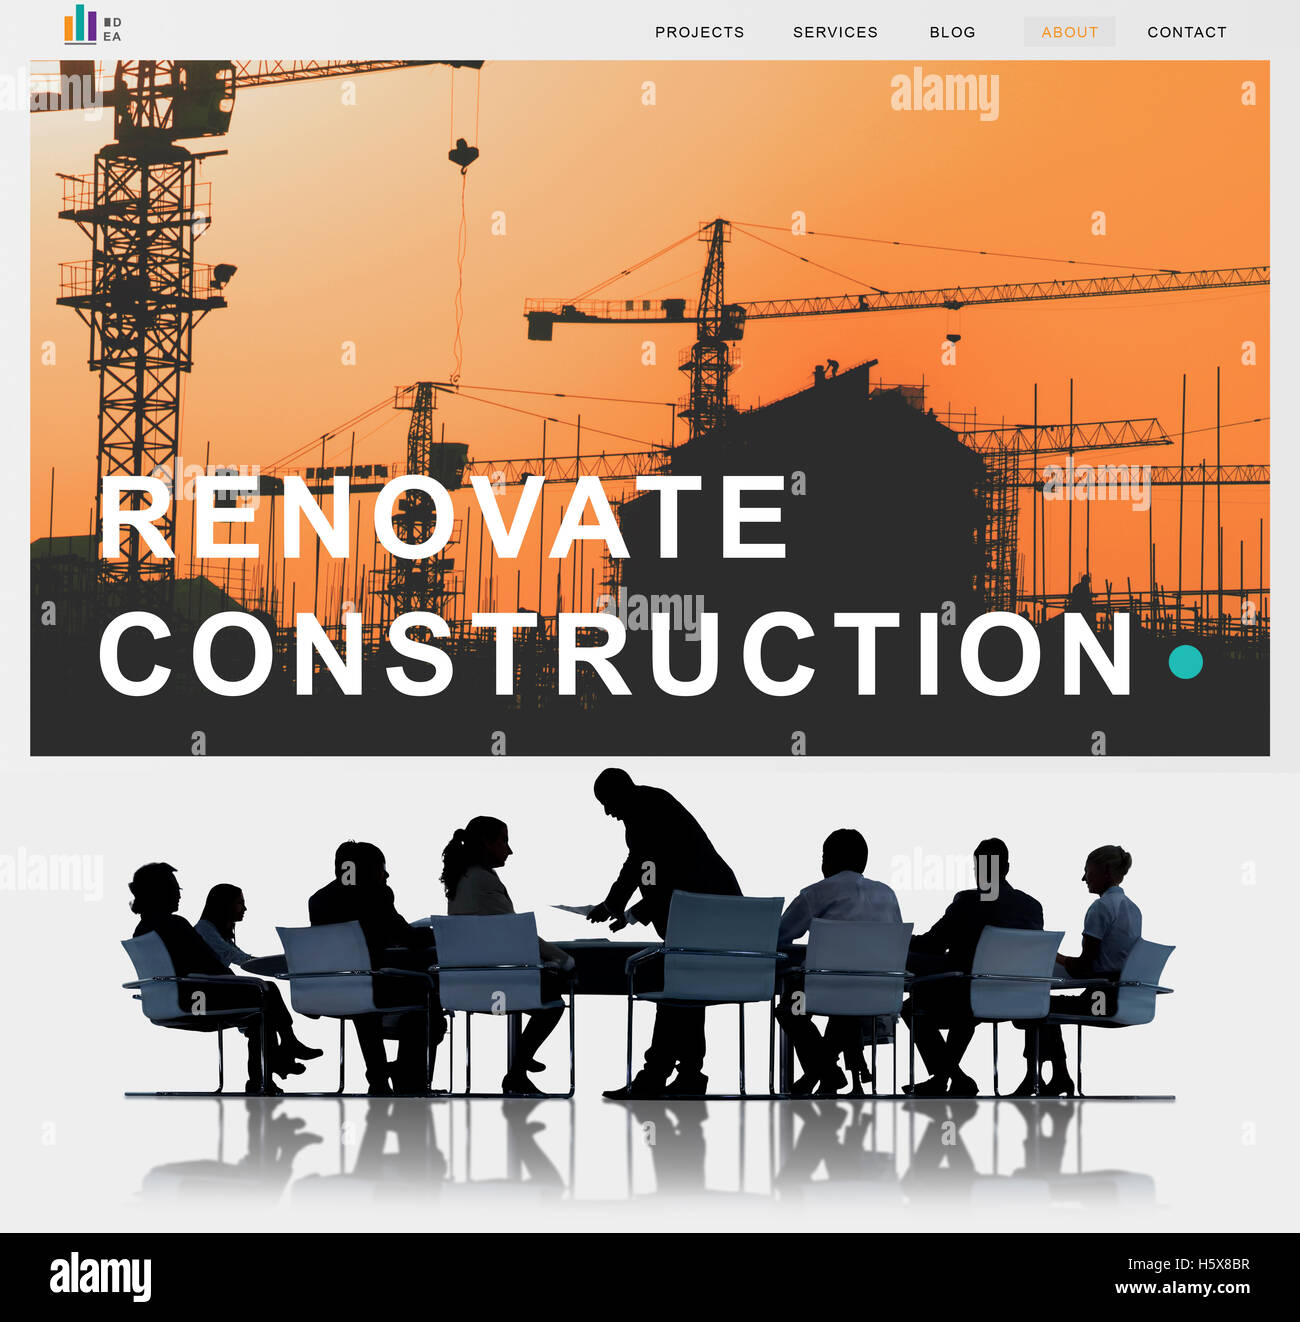 Building Construction Engineering Renovate Site Concept Stock Photo